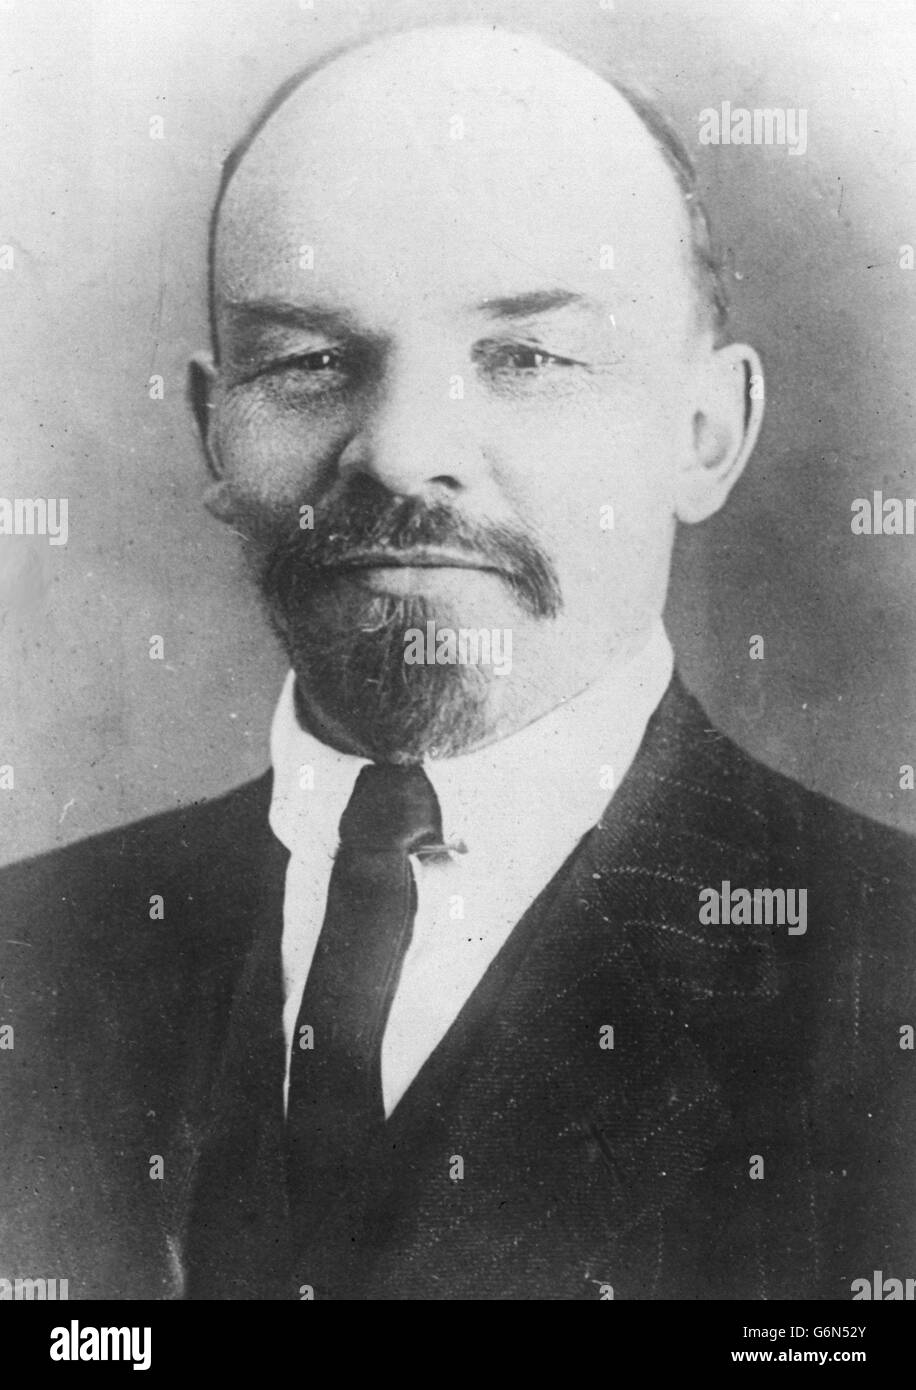 21st January - Died on this Day - 1924 Vladimir Lenin, the Russian Bolshevik leader who led communist Russia following the Russian Revolution of 1917. Stock Photo